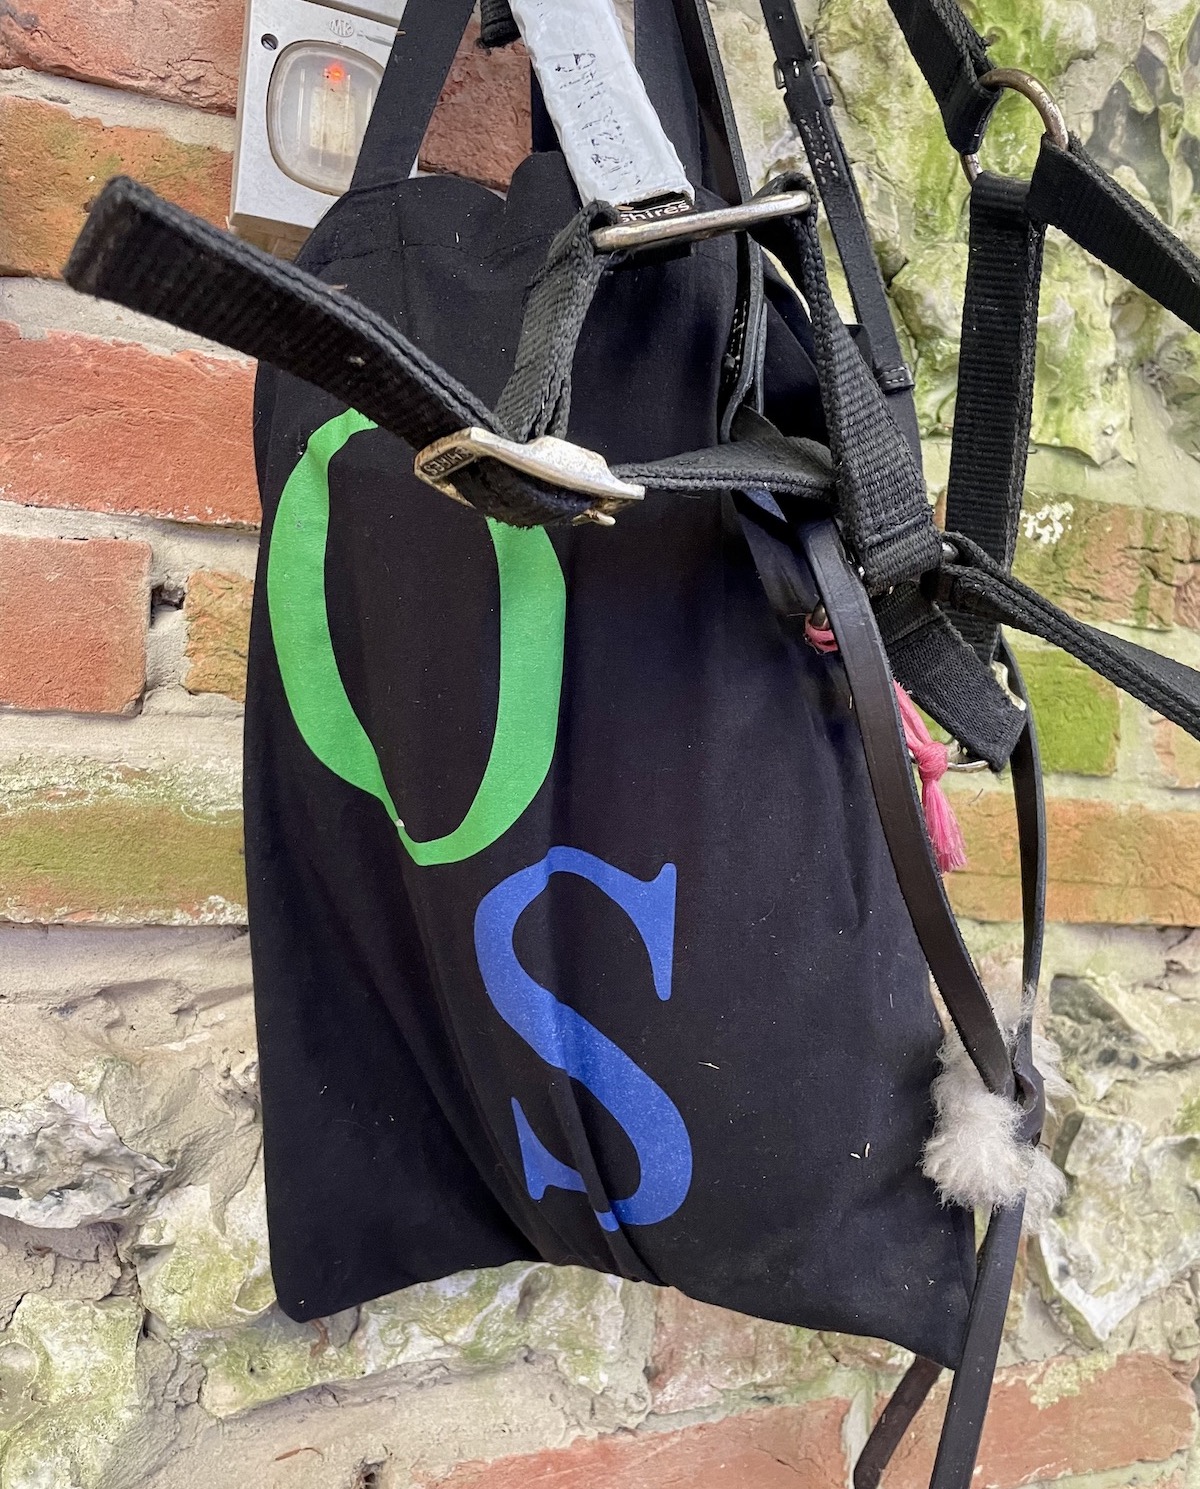 Famous colours: stable livery with blue and green logo reflective of Robert Sangster’s silks. Photo: Laura King